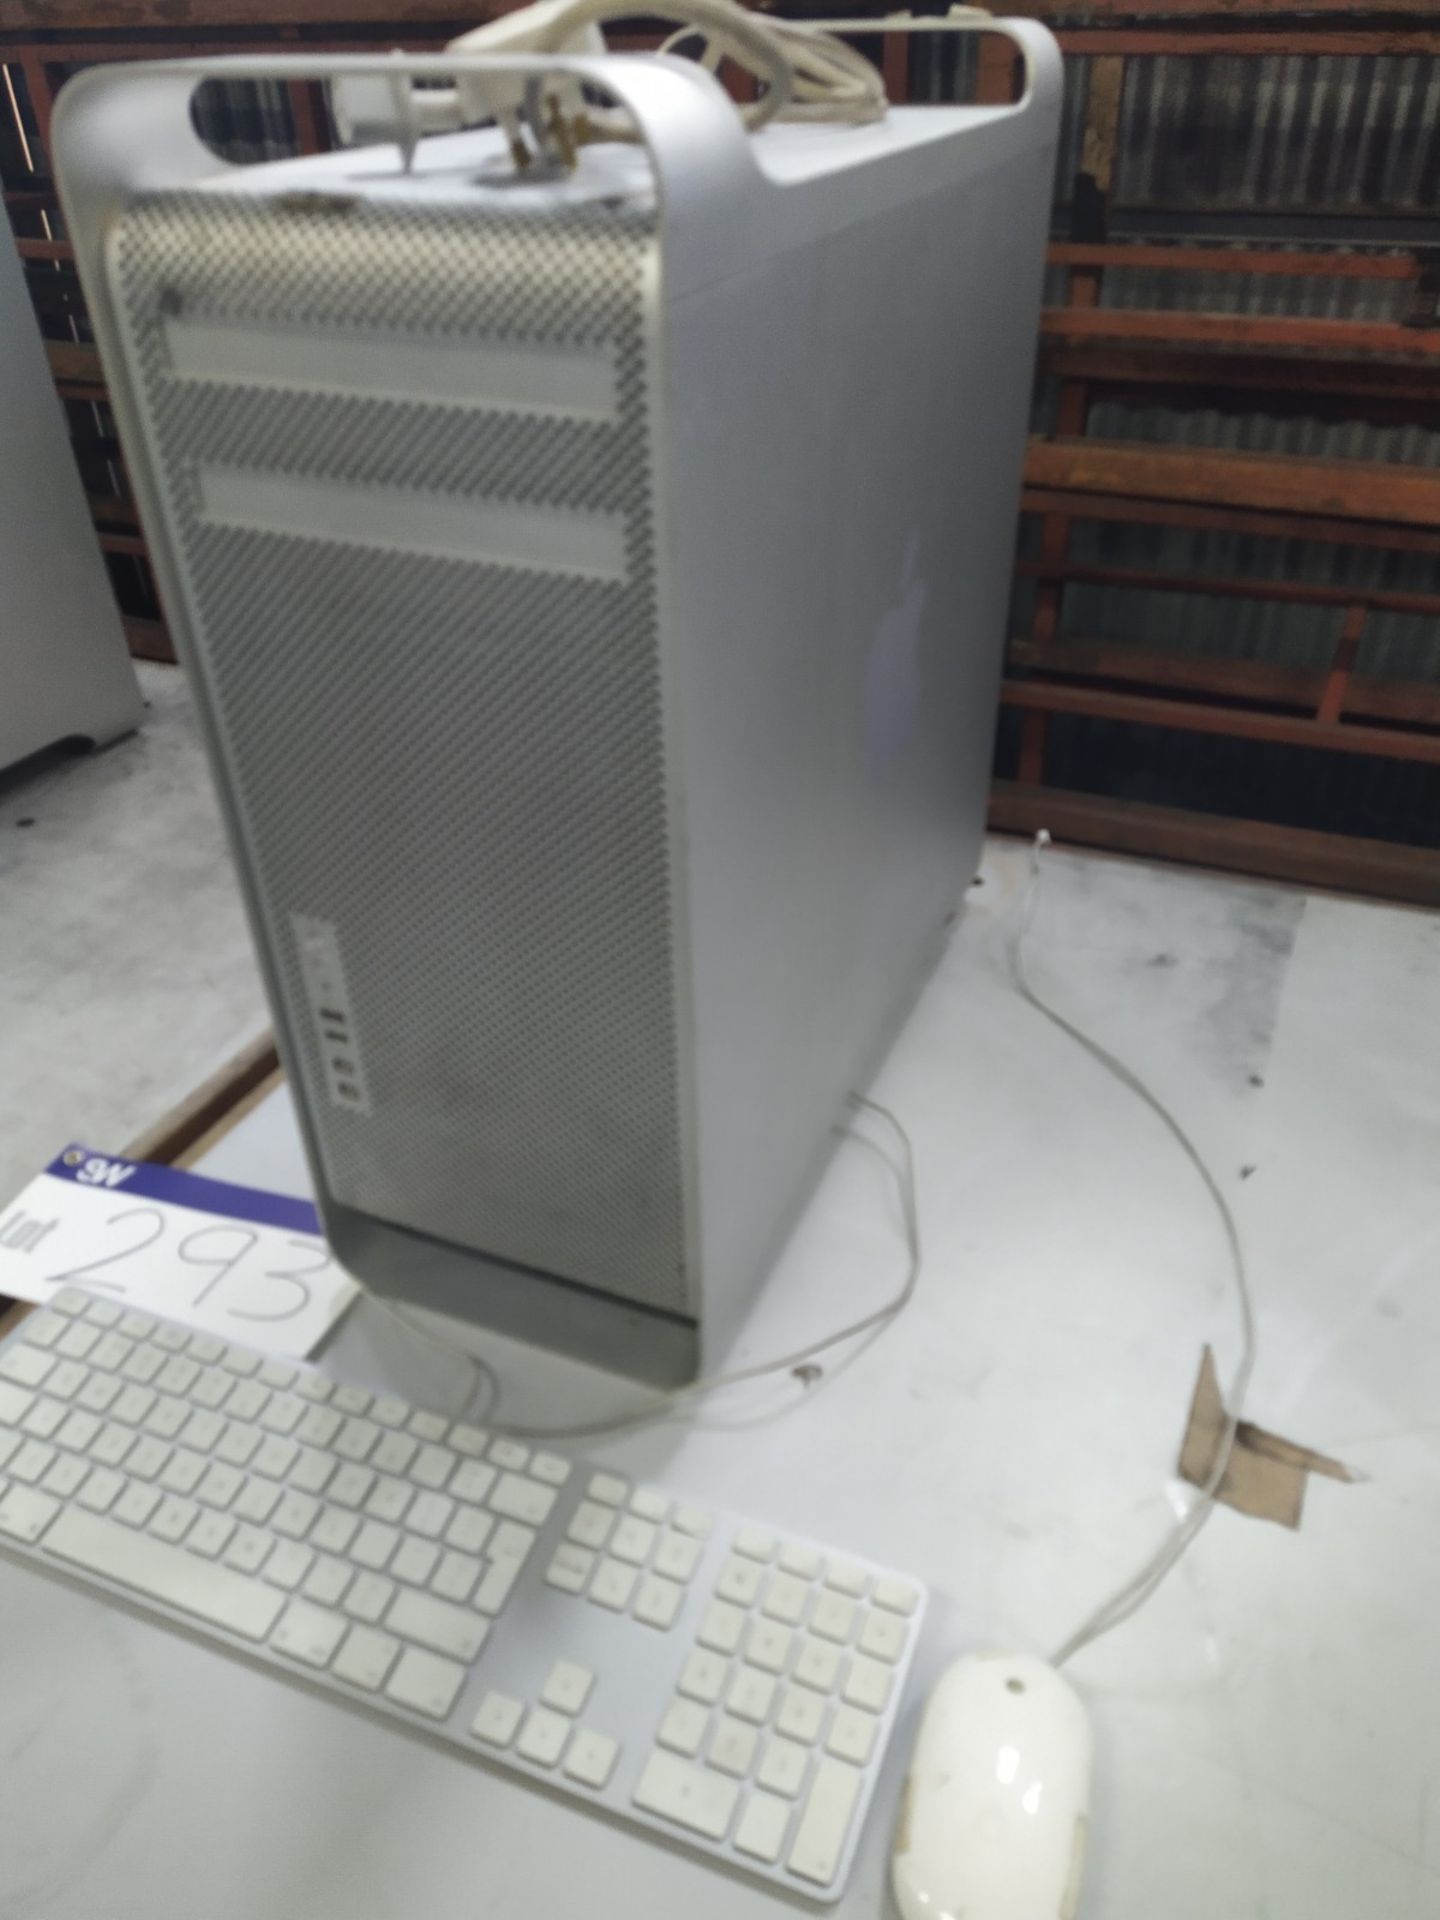 Apple Mac Pro computer, keyboard and mouse, free loading onto purchasers transport - yes, item - Image 2 of 5